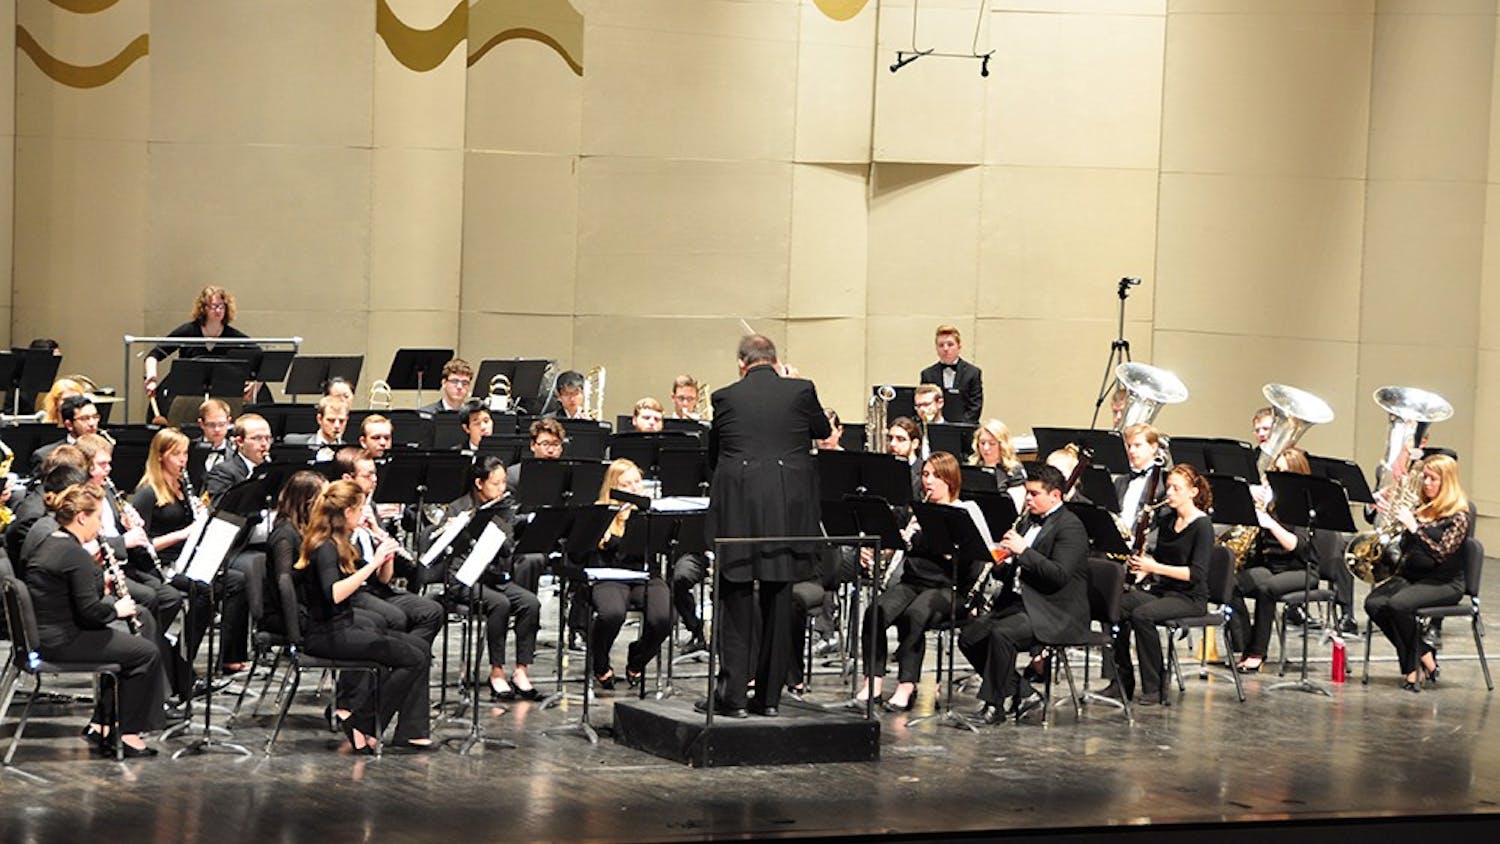 The Jacobs School of Music plans to ring in the new season with a concert featuring the Wind Ensemble, Symphonic Band and Concert Band.